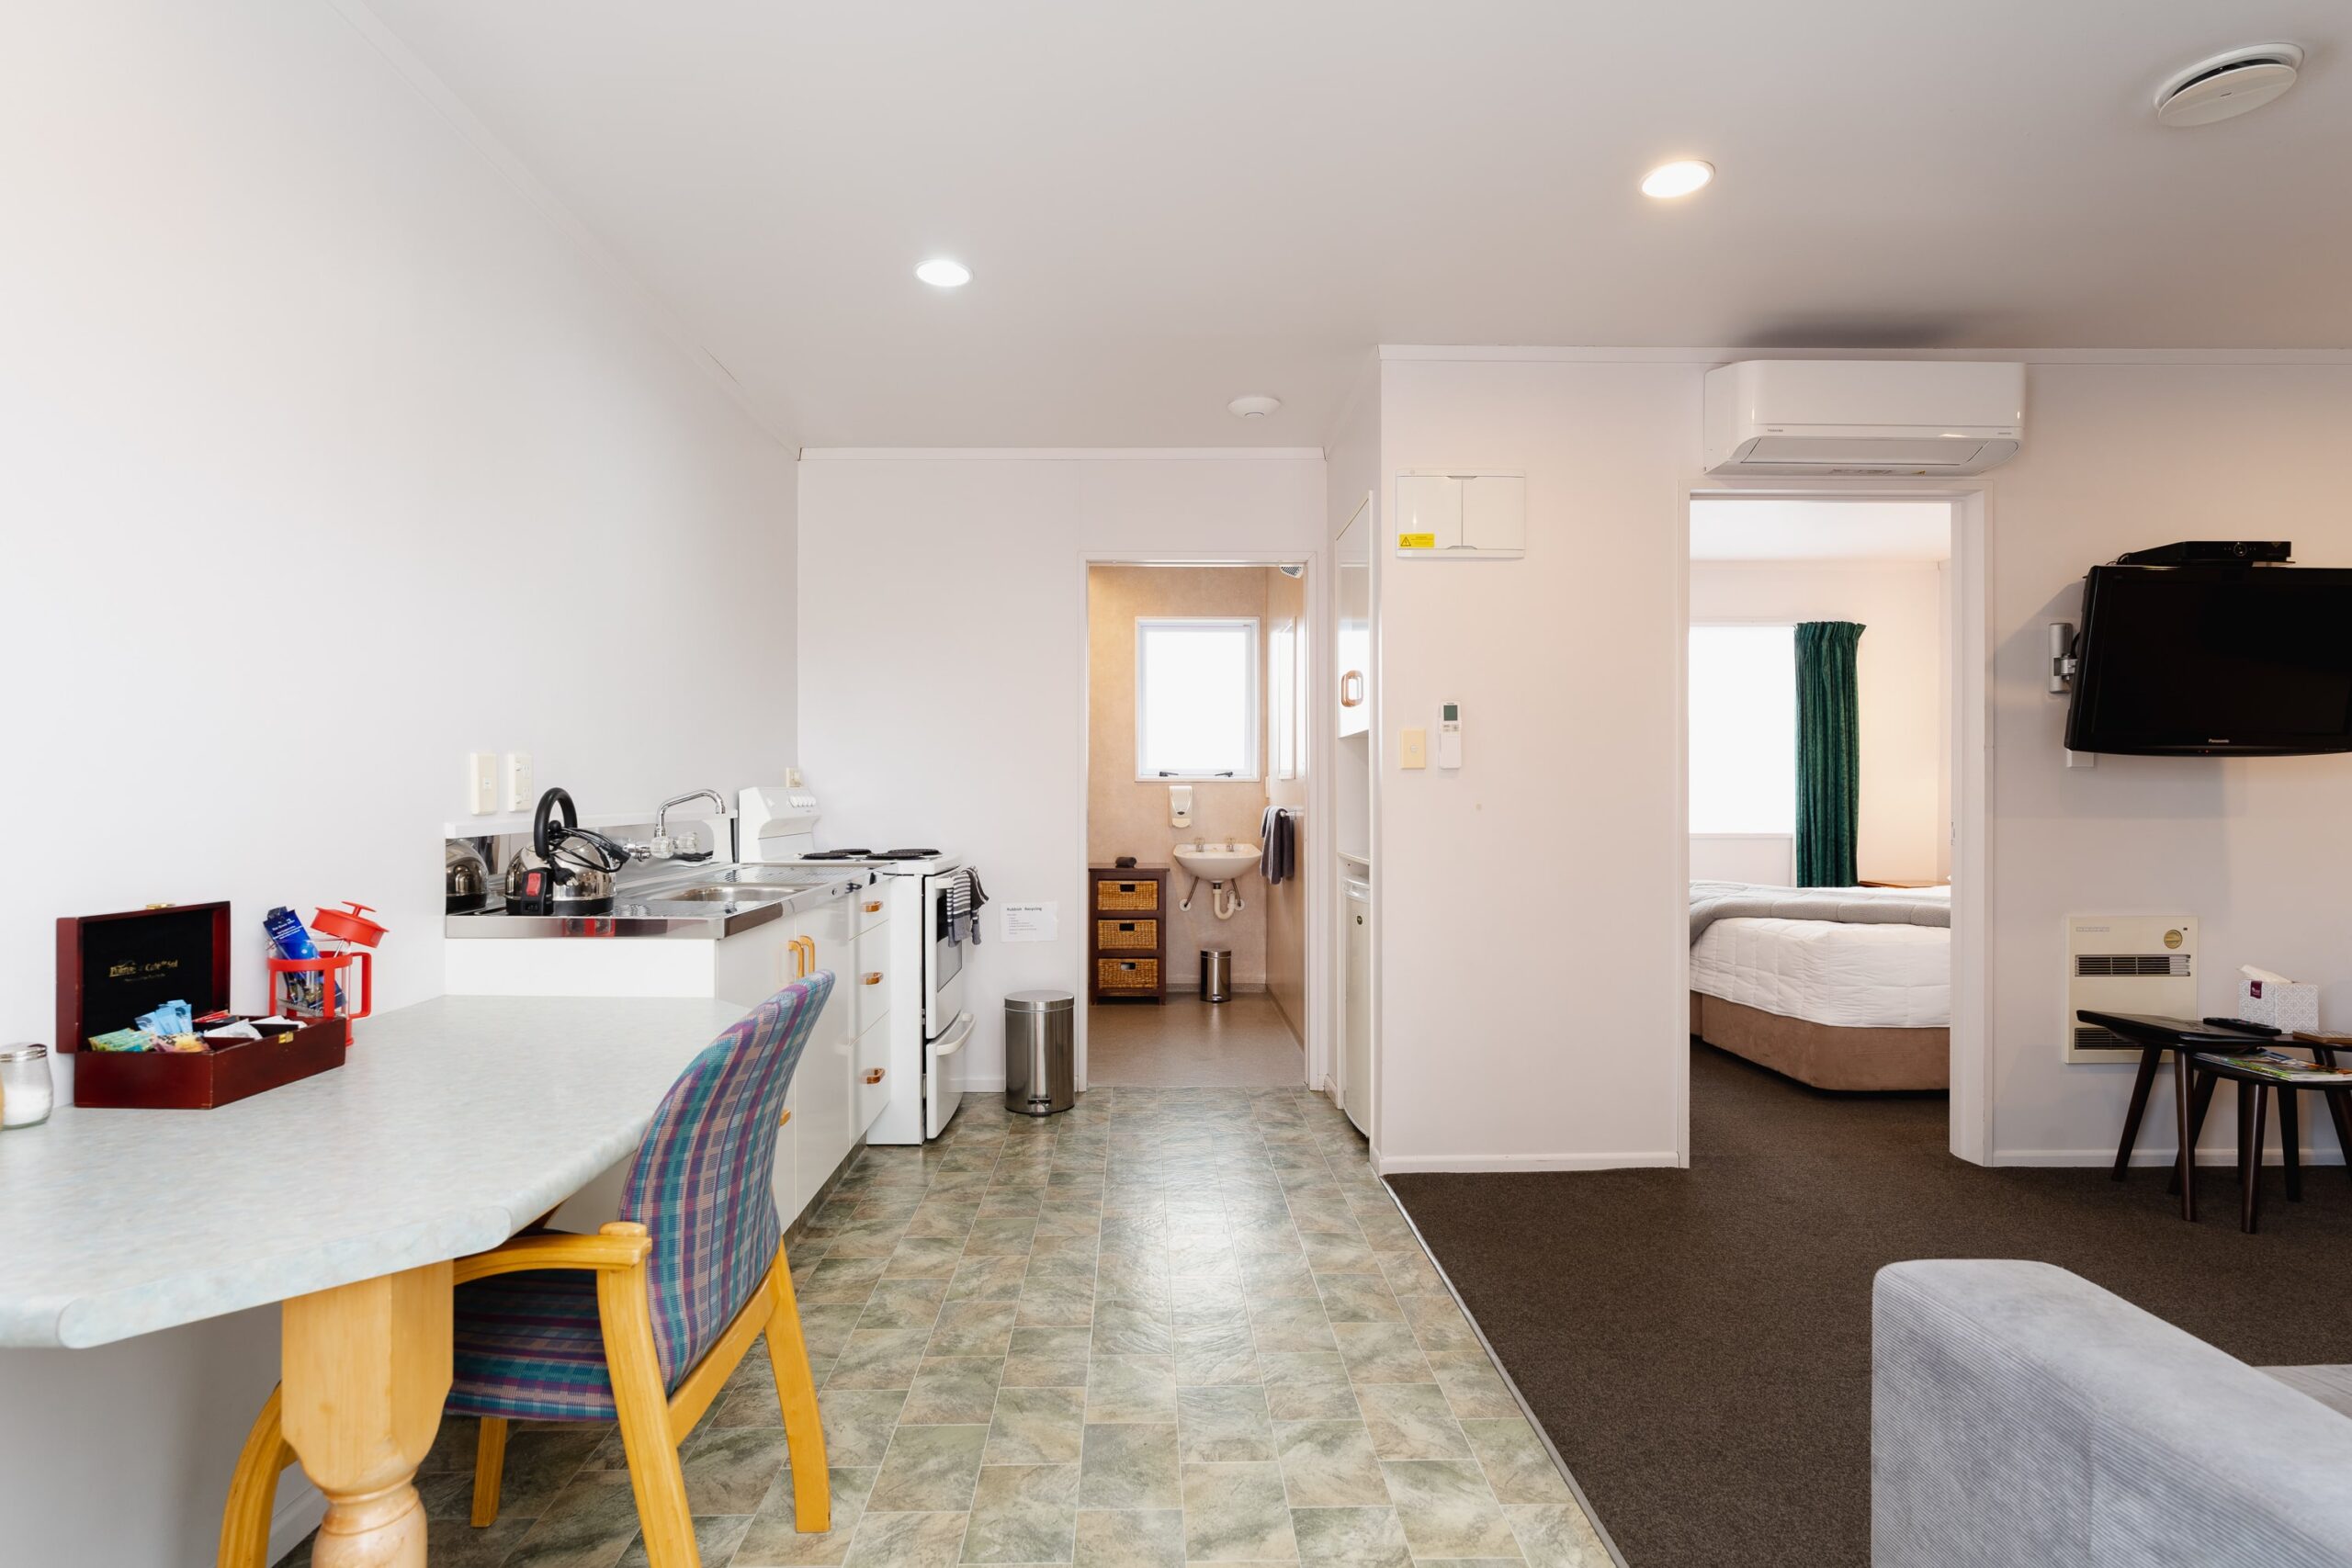 Highway Lodge Motel Accommodation in Balclutha - King One Bedroom Unit